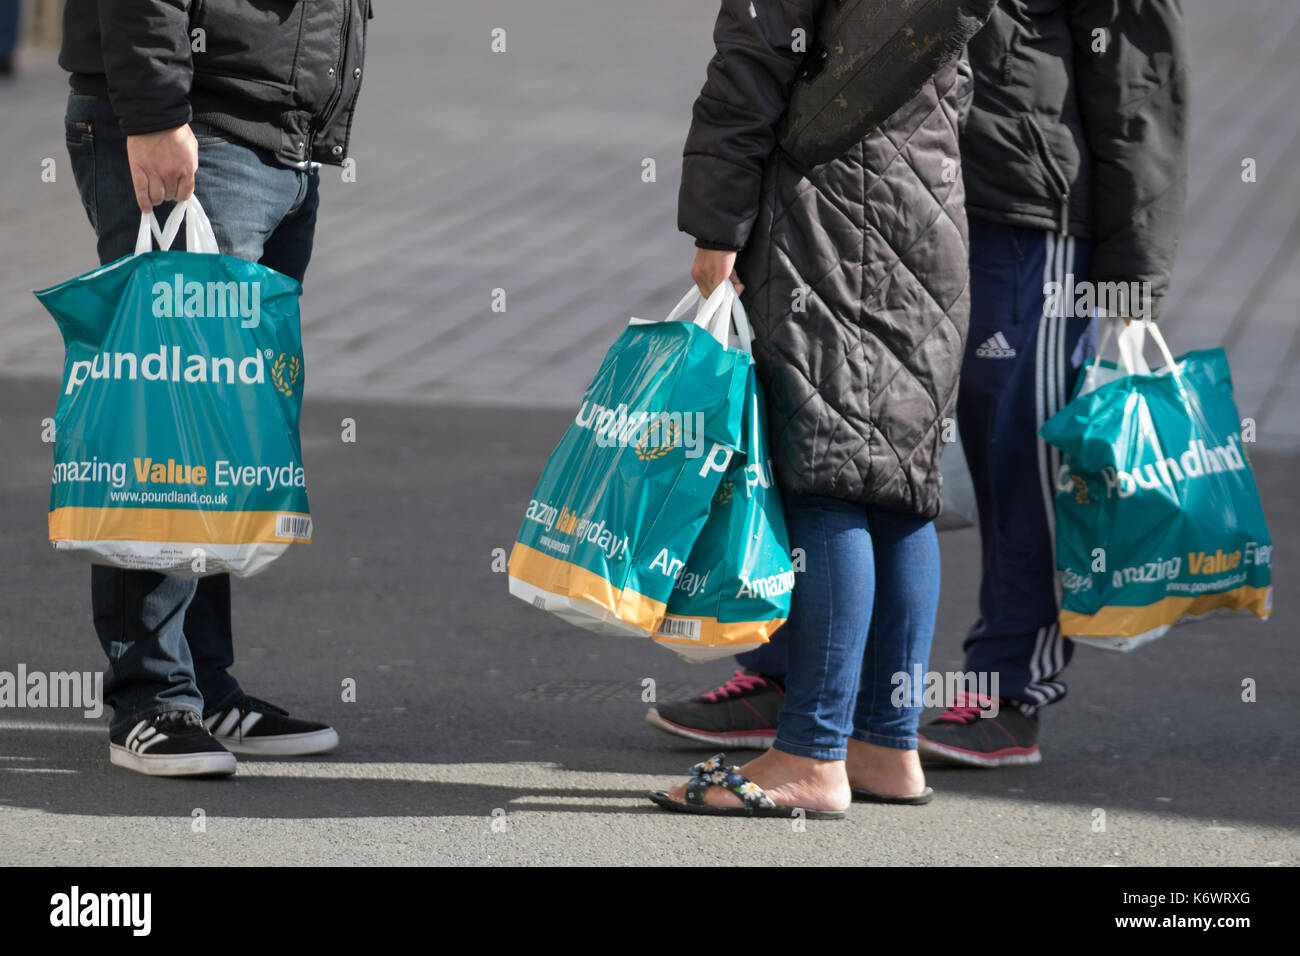 Shoppers with reusable bags from the Discount retail chain Poundland ...